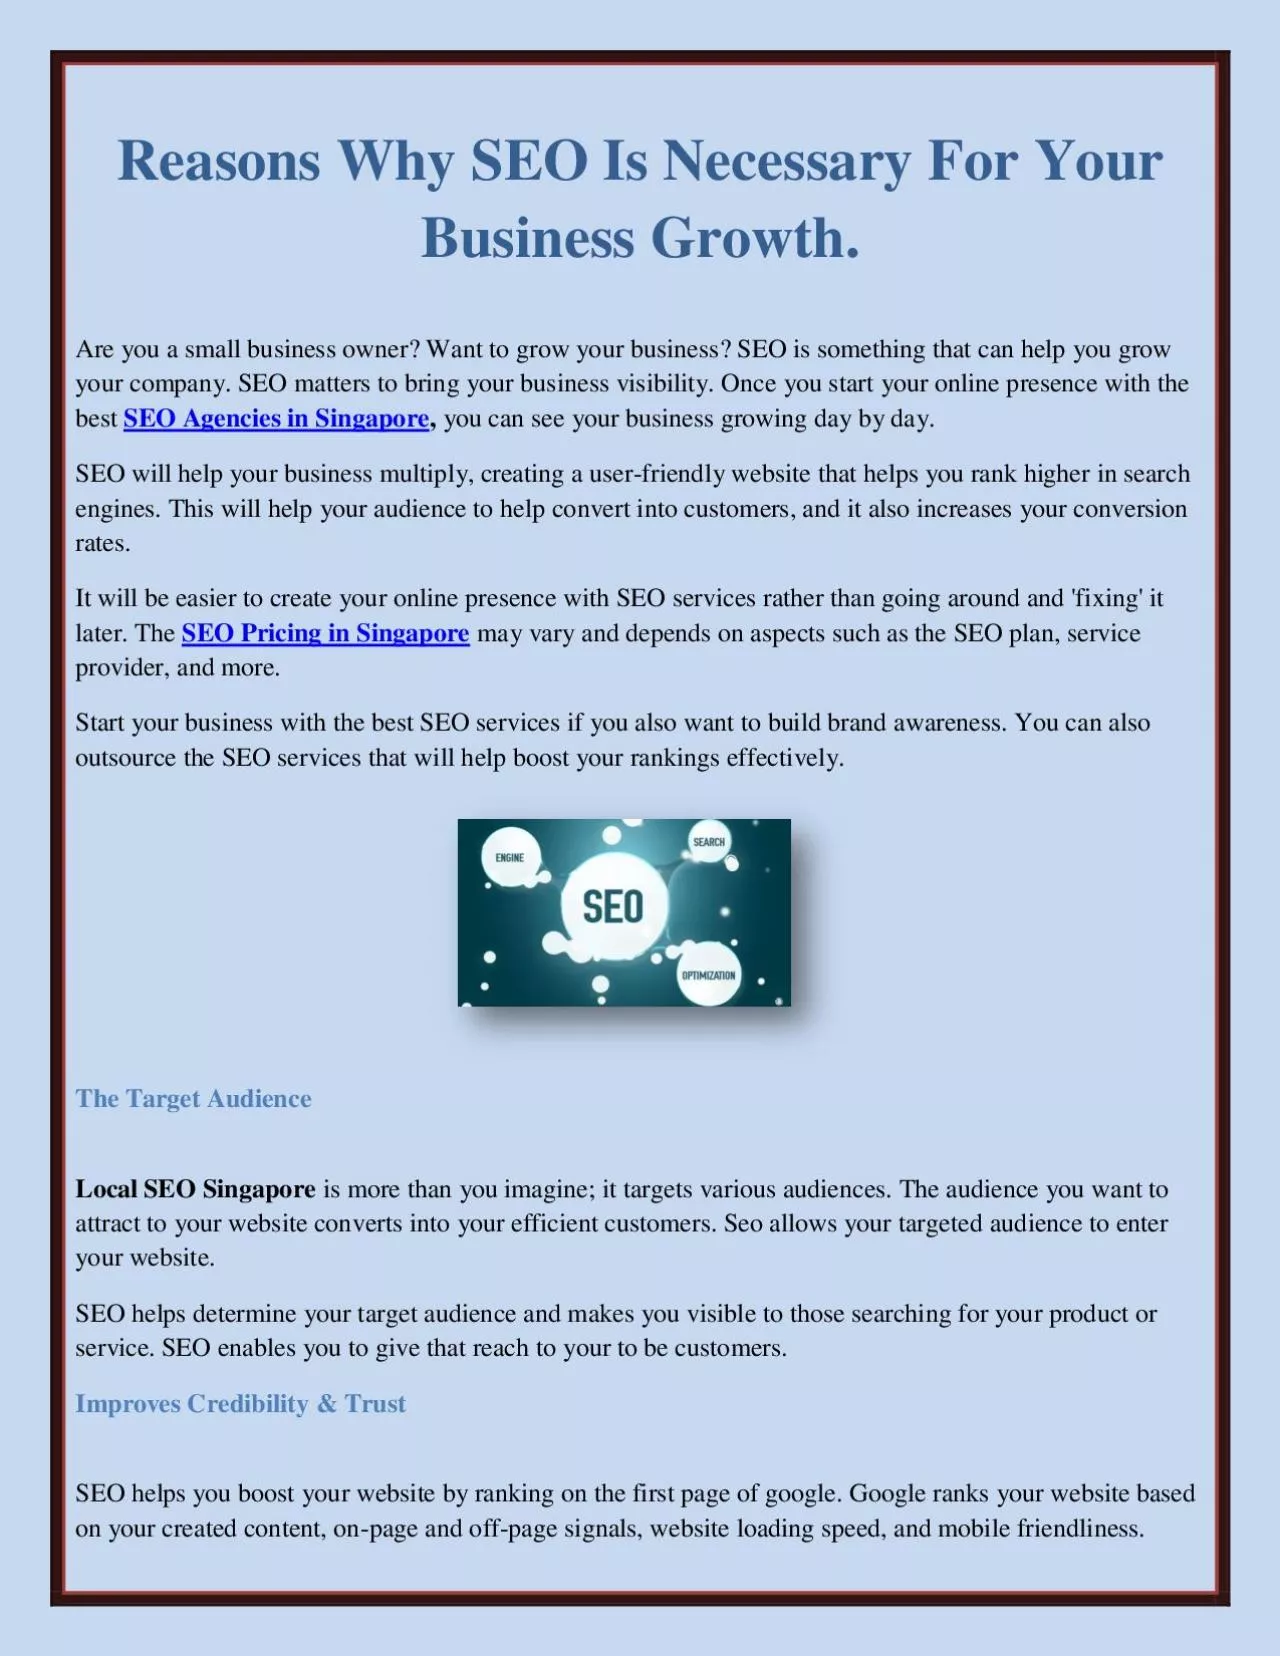 Reasons Why SEO Is Necessary For Your Business Growth.